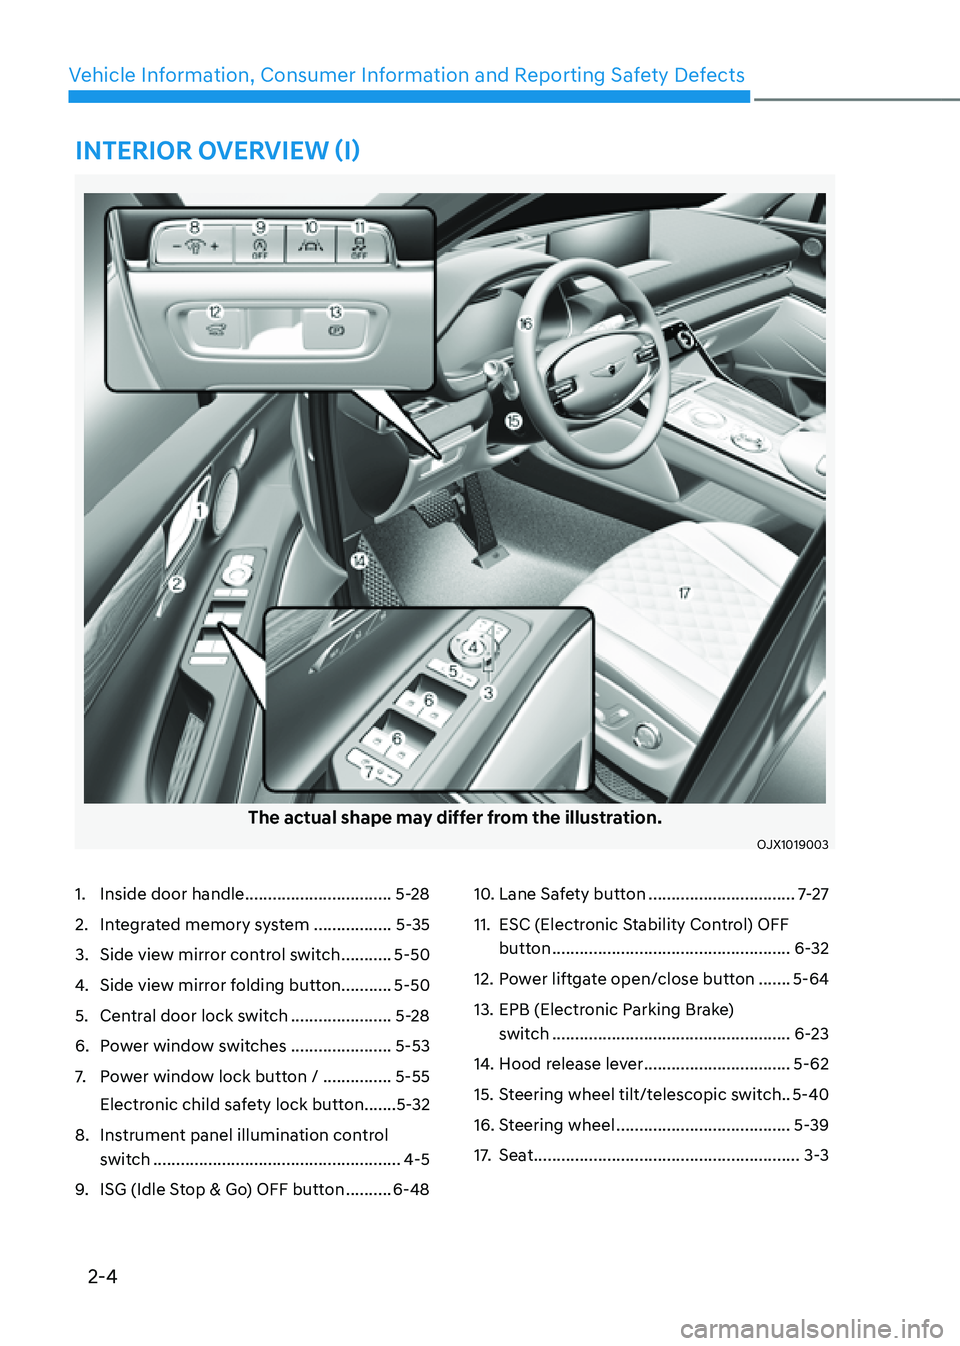 GENESIS GV80 2021  Owners Manual 2-4
Vehicle Information, Consumer Information and Reporting Safety Defects
The actual shape may differ from the illustration.
OJX1019003OJX1019003
1. Inside door handle ...............................